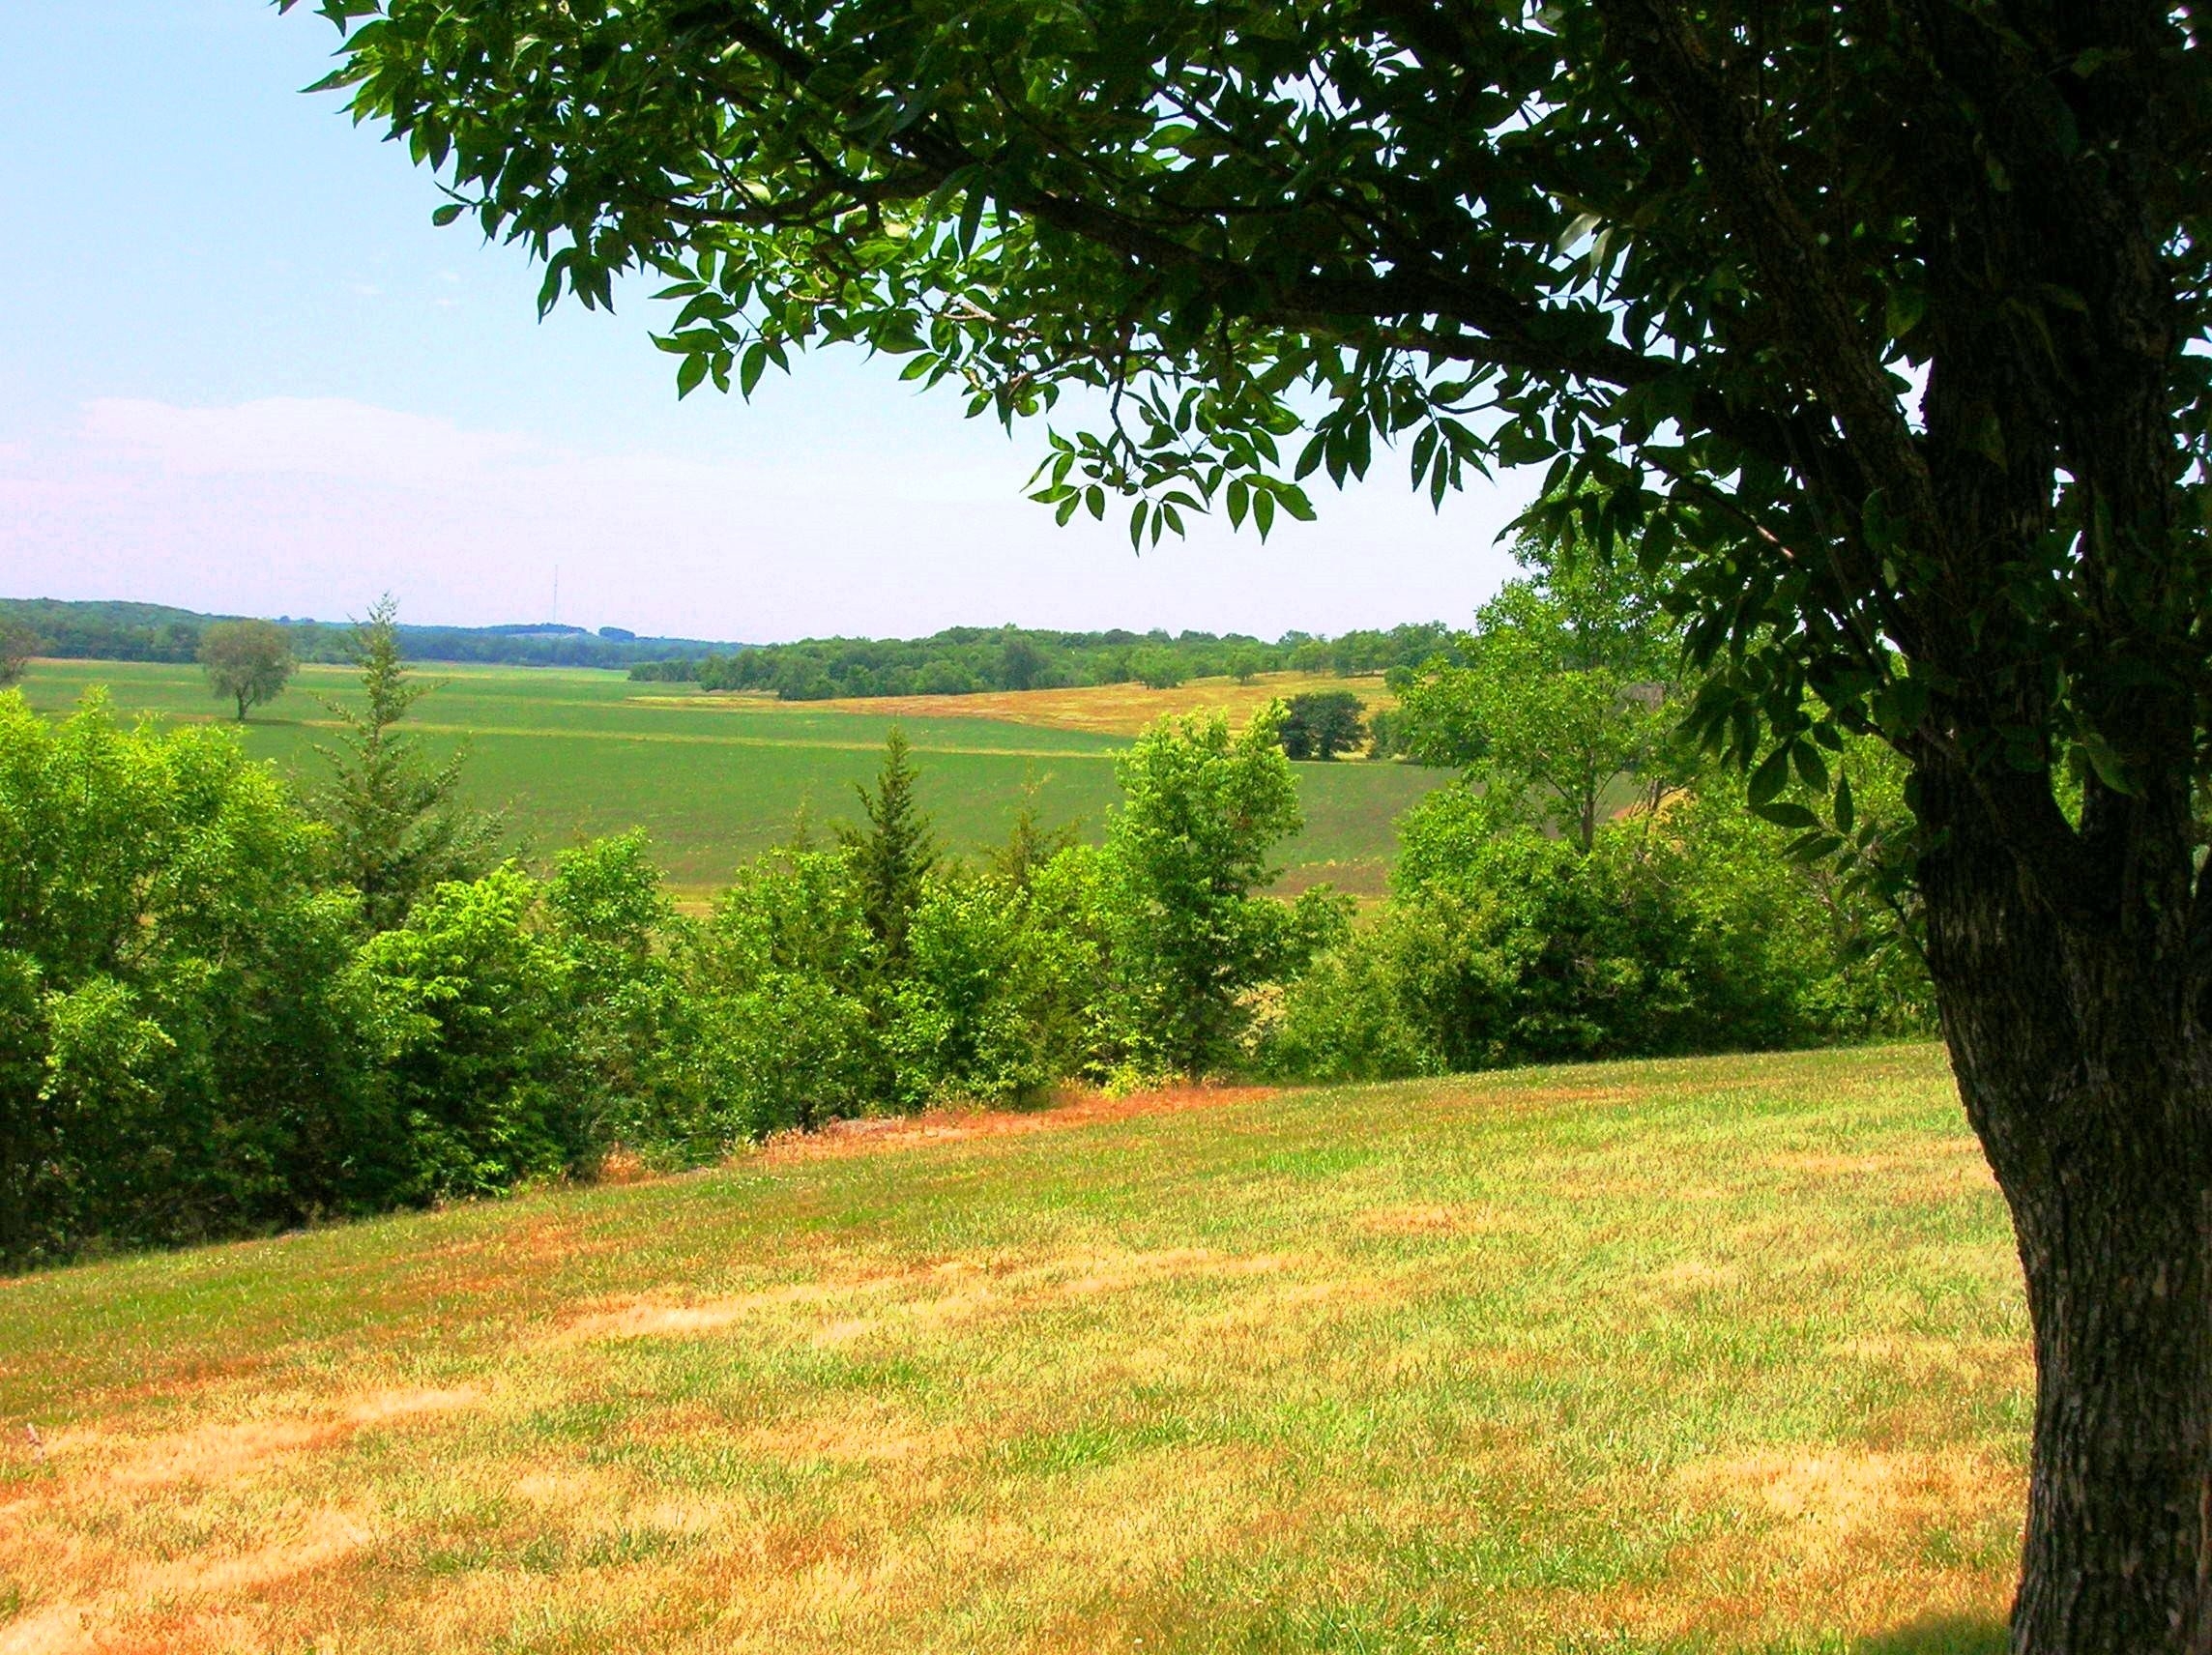 The green fields of Adam-ondi-Ahman in Missouri and a tree in the foreground.